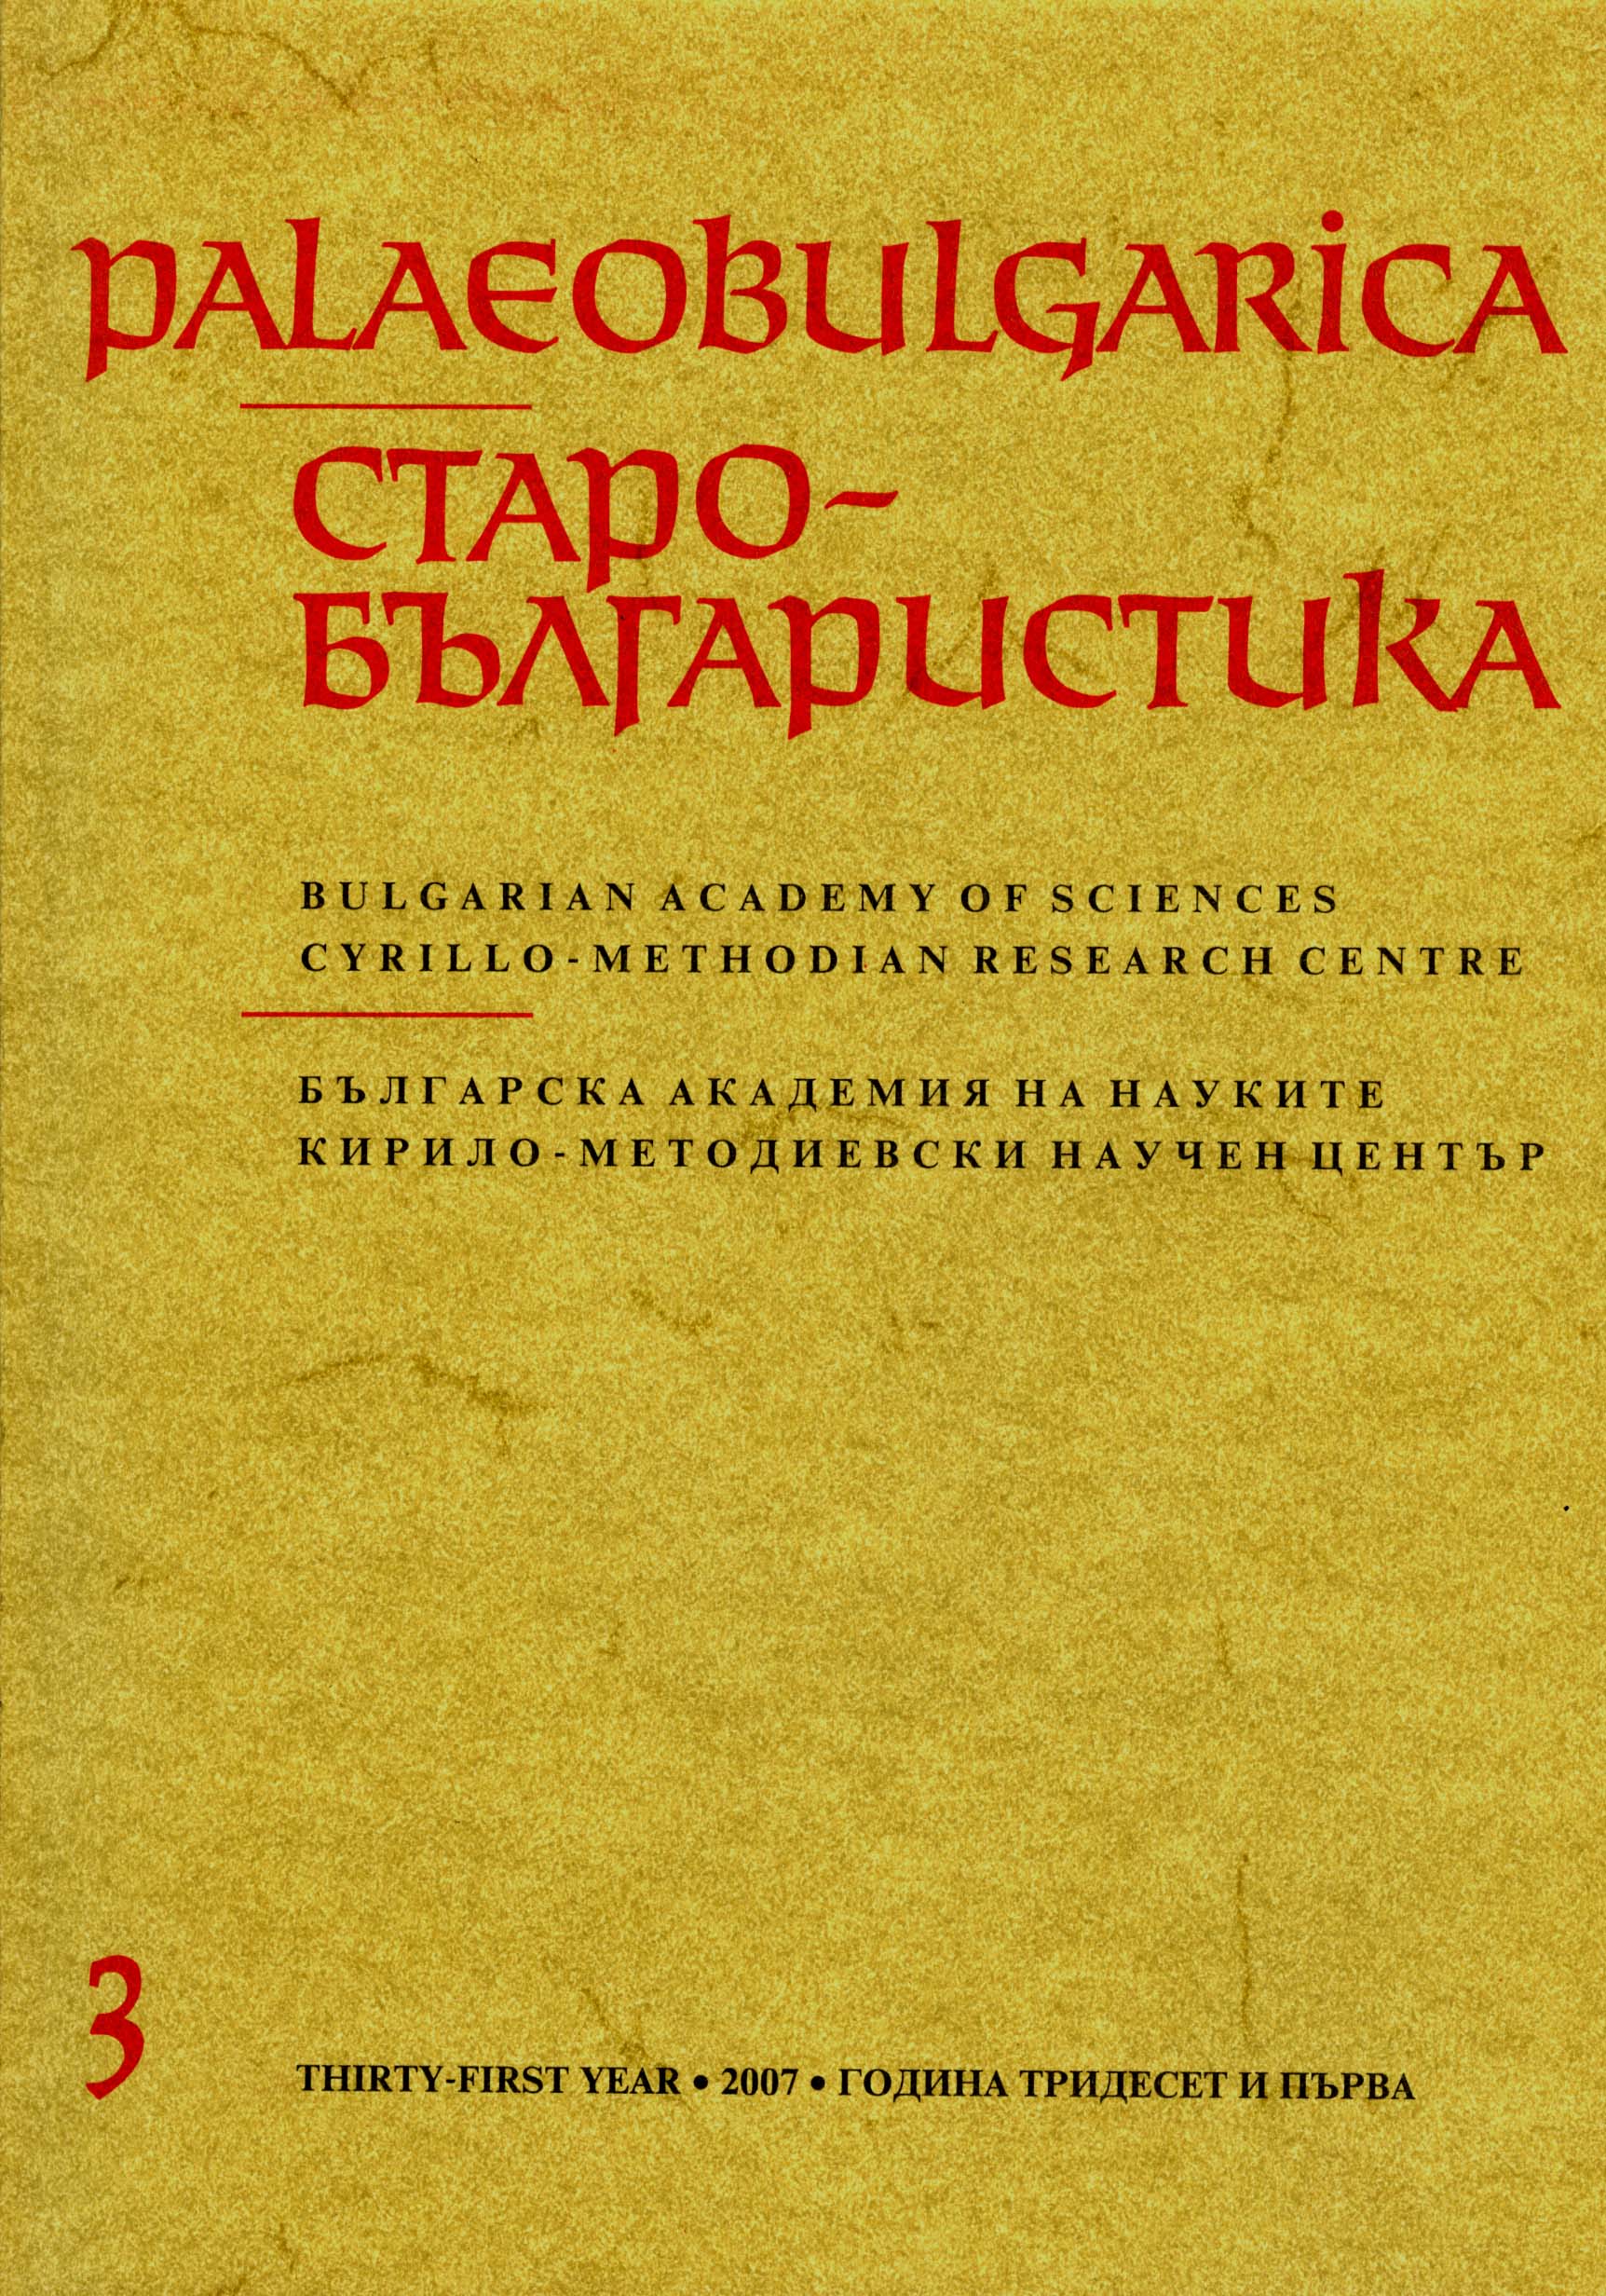 The History of the Calendar and Other Liturgical Material in the Tetraevangelion of Tsar Ivan Alexander Cover Image